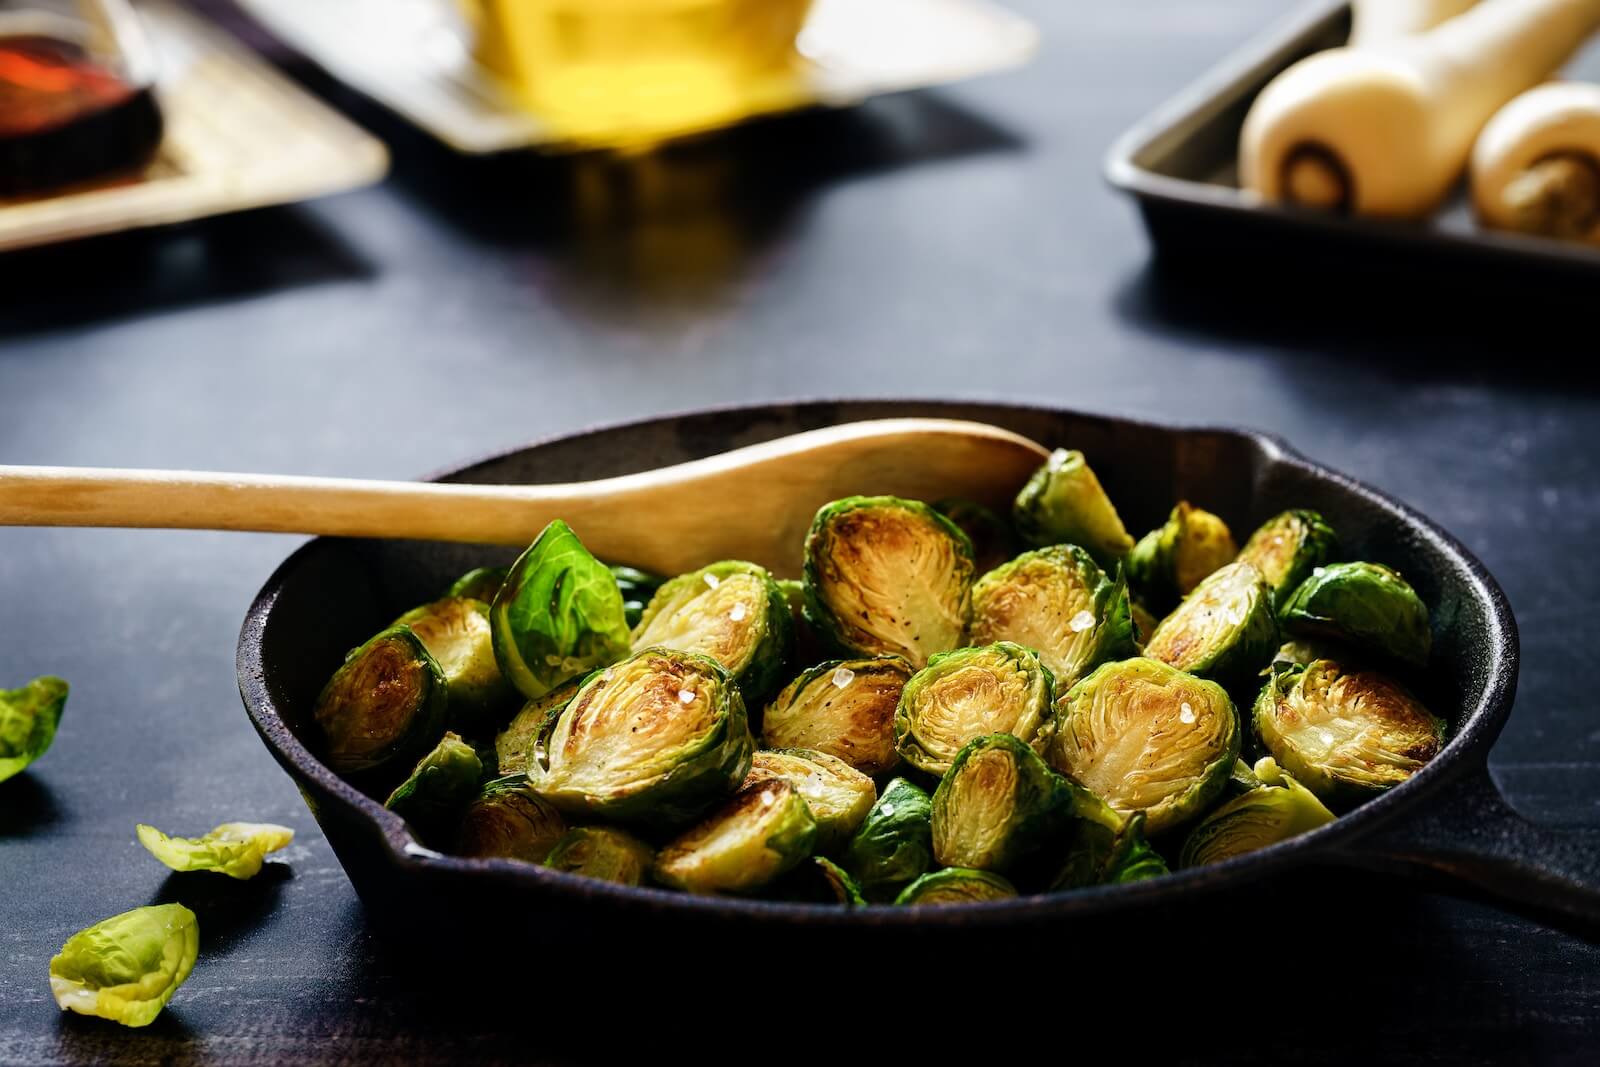 A bowl of roasted Brussels sprouts